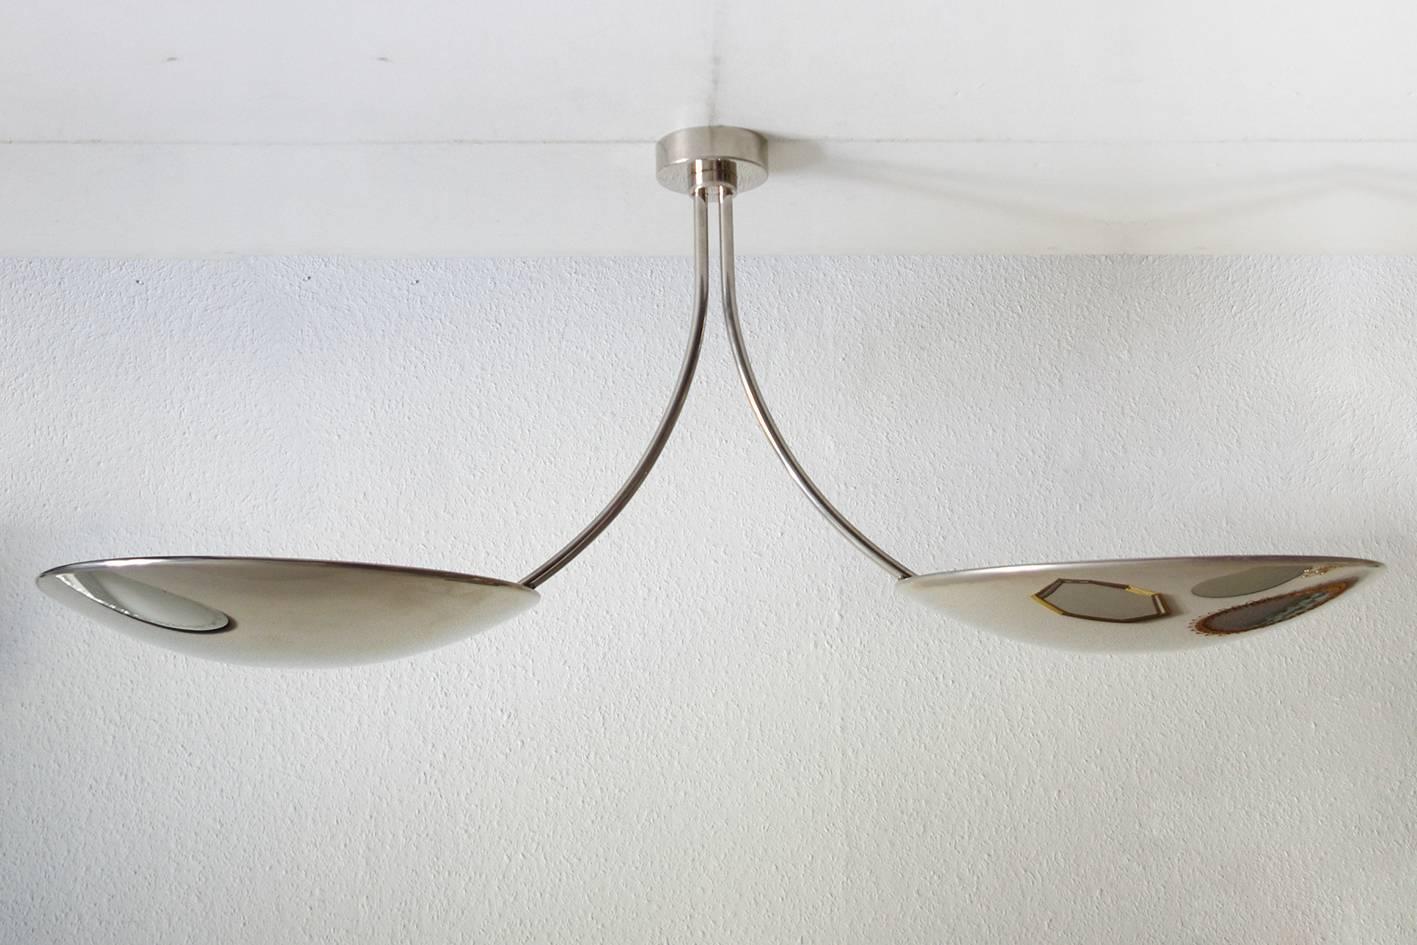 Large solid brass chrome or nickel-plated ceiling flush mount by Florian Schulz.
Simple design, indirect lighting,
Germany, 1970s.
Lamp sockets: Two x E27 (US E26).